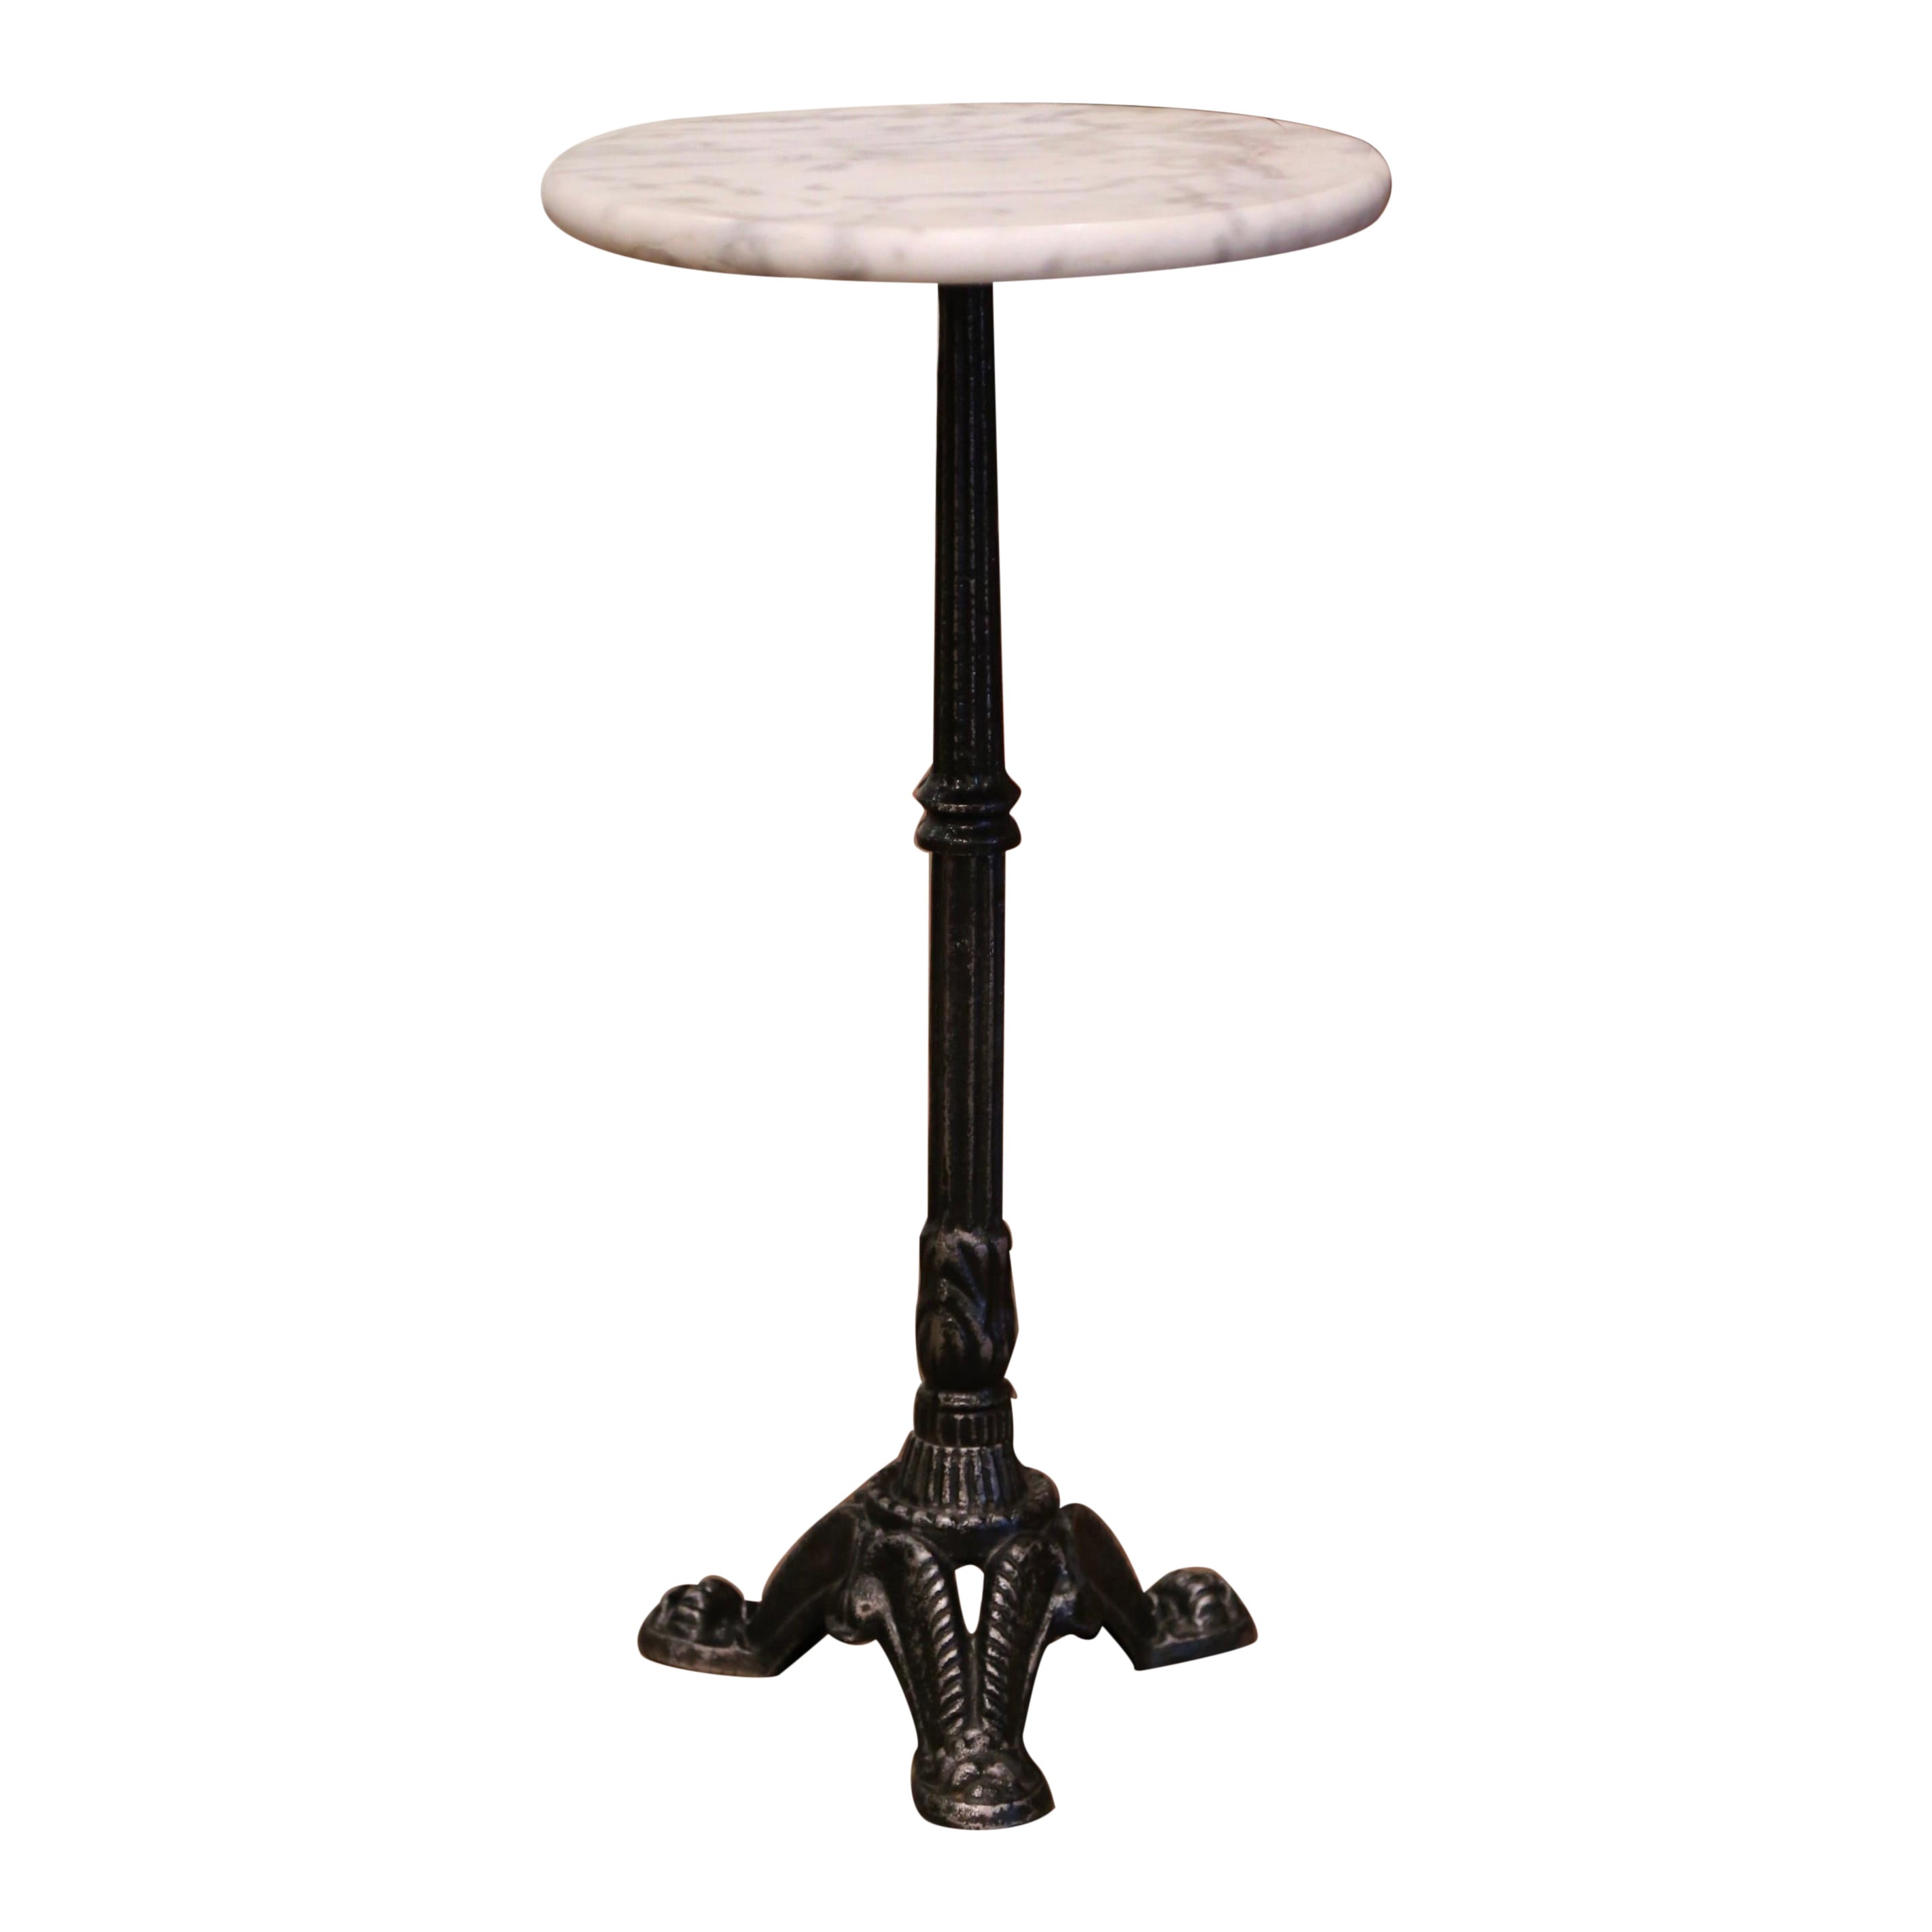 Early 20th Century French Polished Iron Martini Pedestal Table with Marble Top